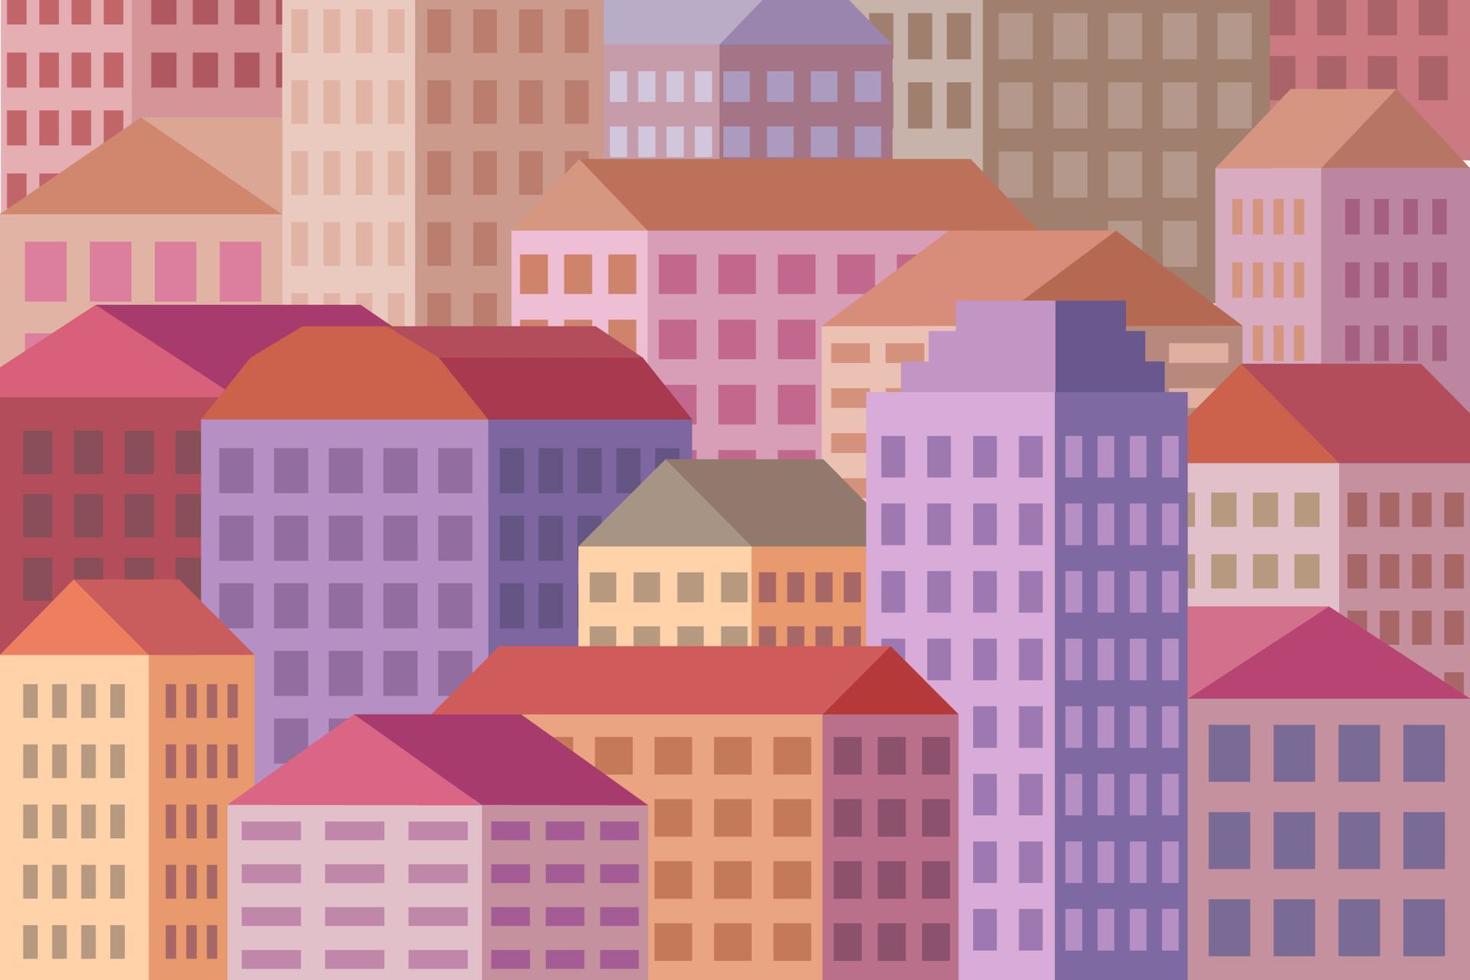 Colorful city vector illustration, flat design of cityscape in cartoon style.